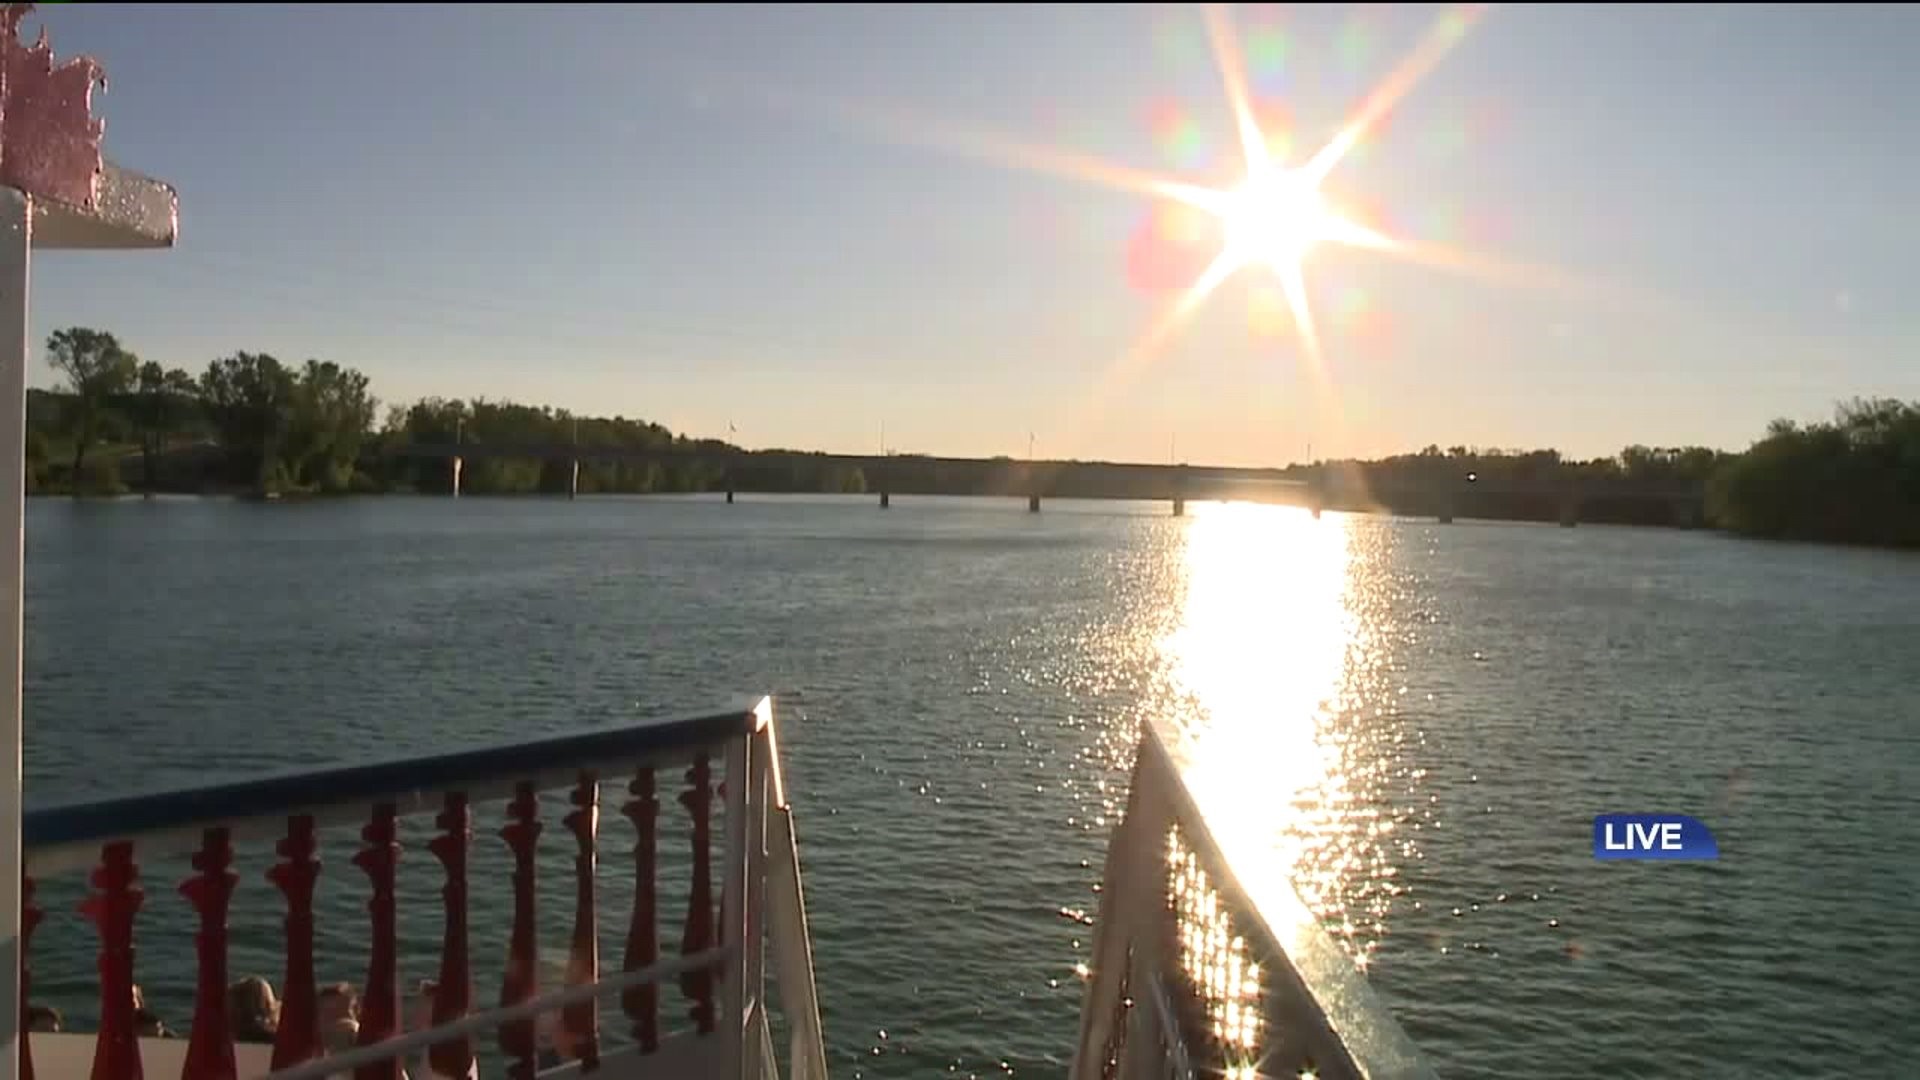 Popular Paddlewheel Plans Special Cruise for Veterans in Central Pennsylvania